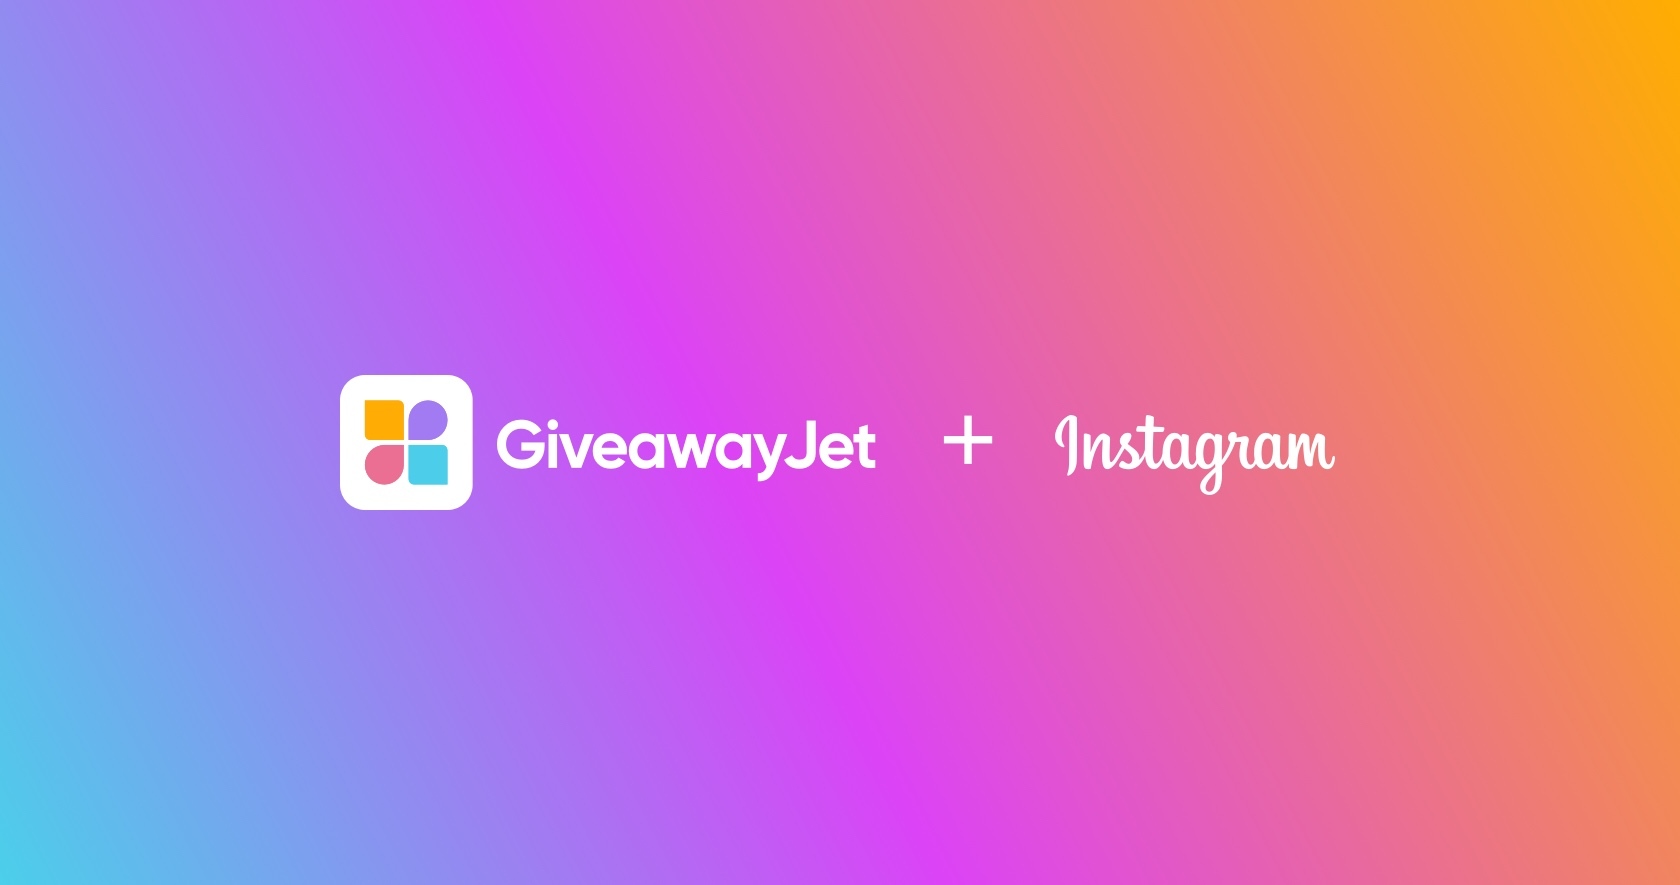 How to Make a Giveaway with GiveawayJet?